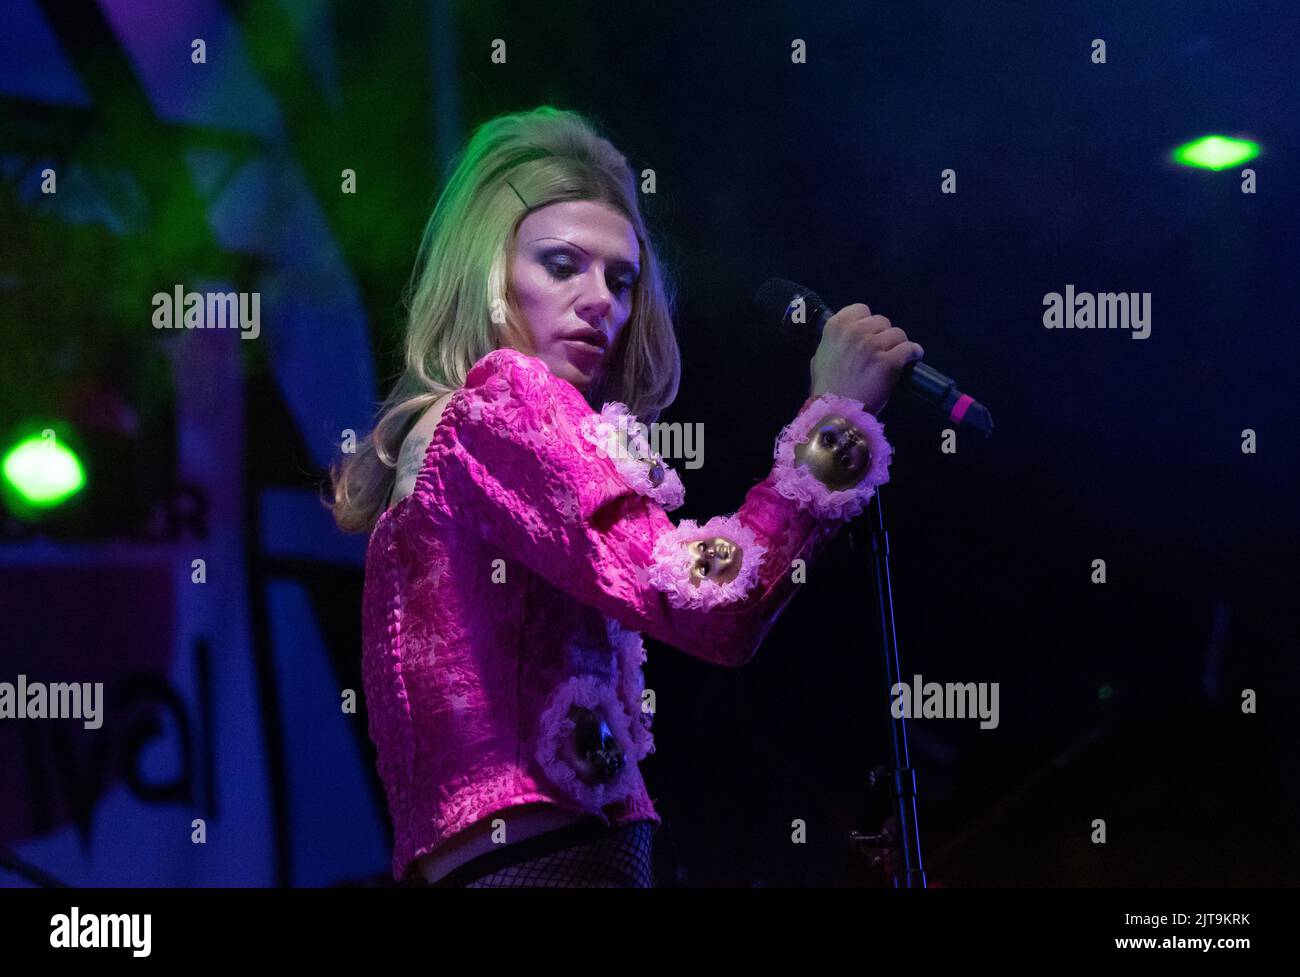 Manchester, UK. 28th Aug, 2022. Bimini ,British performer, recording artist and one of the Season 2 contestants of RuPaul's Drag Race UK plays the Alan Turing stage at Manchester Pride on Sunday 28th of August. Picture garyroberts/worldwidefeatures.com Credit: GaryRobertsphotography/Alamy Live News Stock Photo